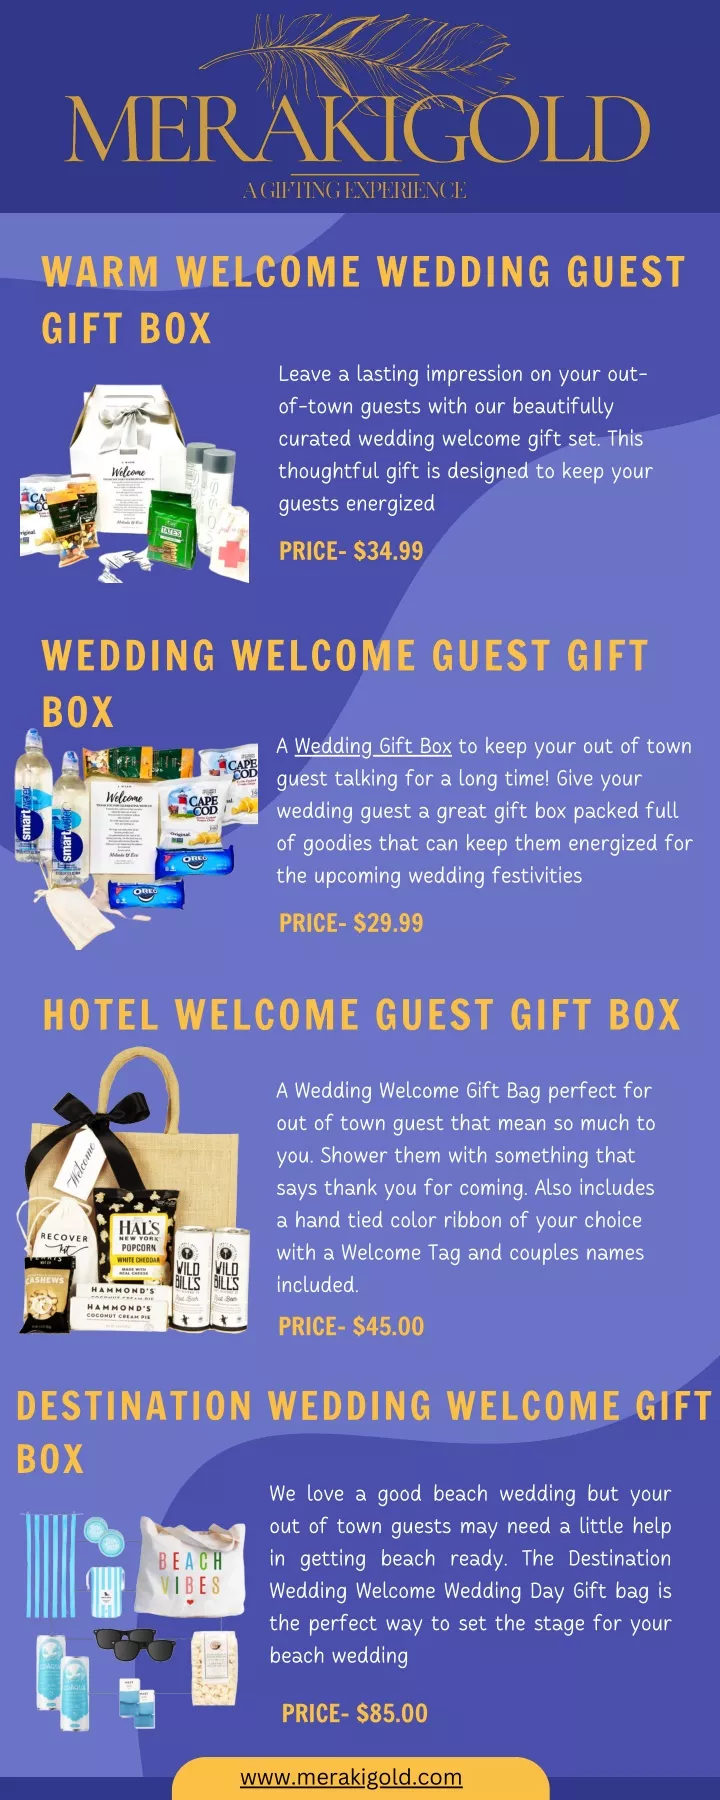 warm welcome wedding guest gift box leave